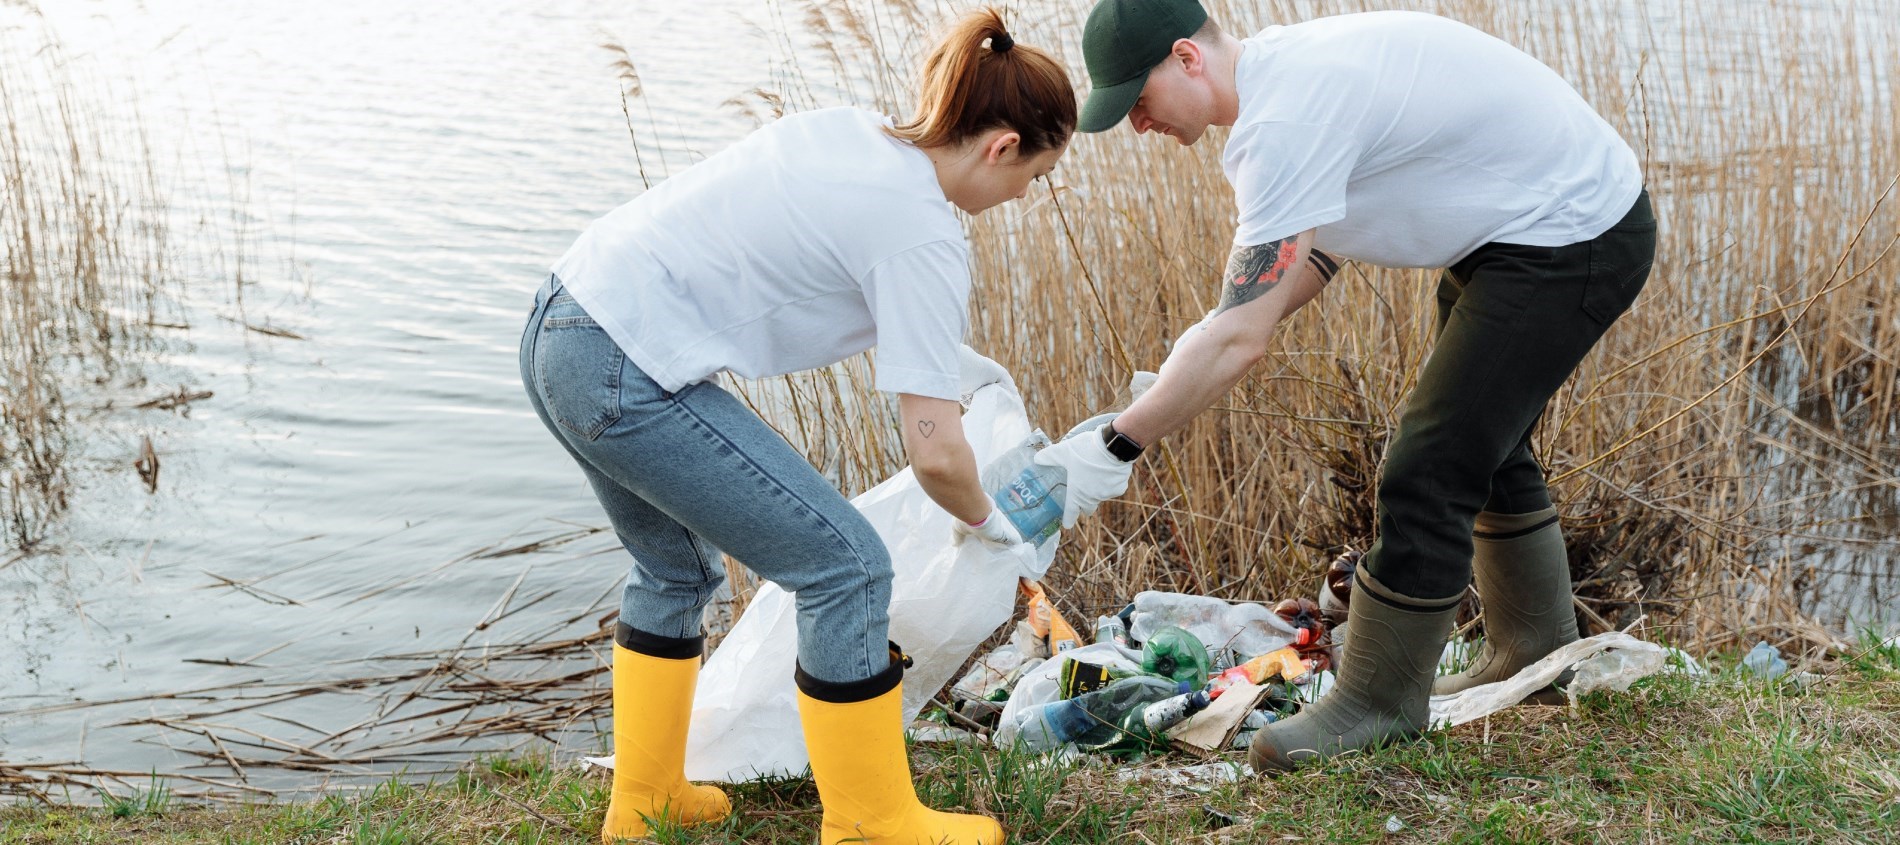 Picture of a man and a woman picking up garbage beside a body of water.